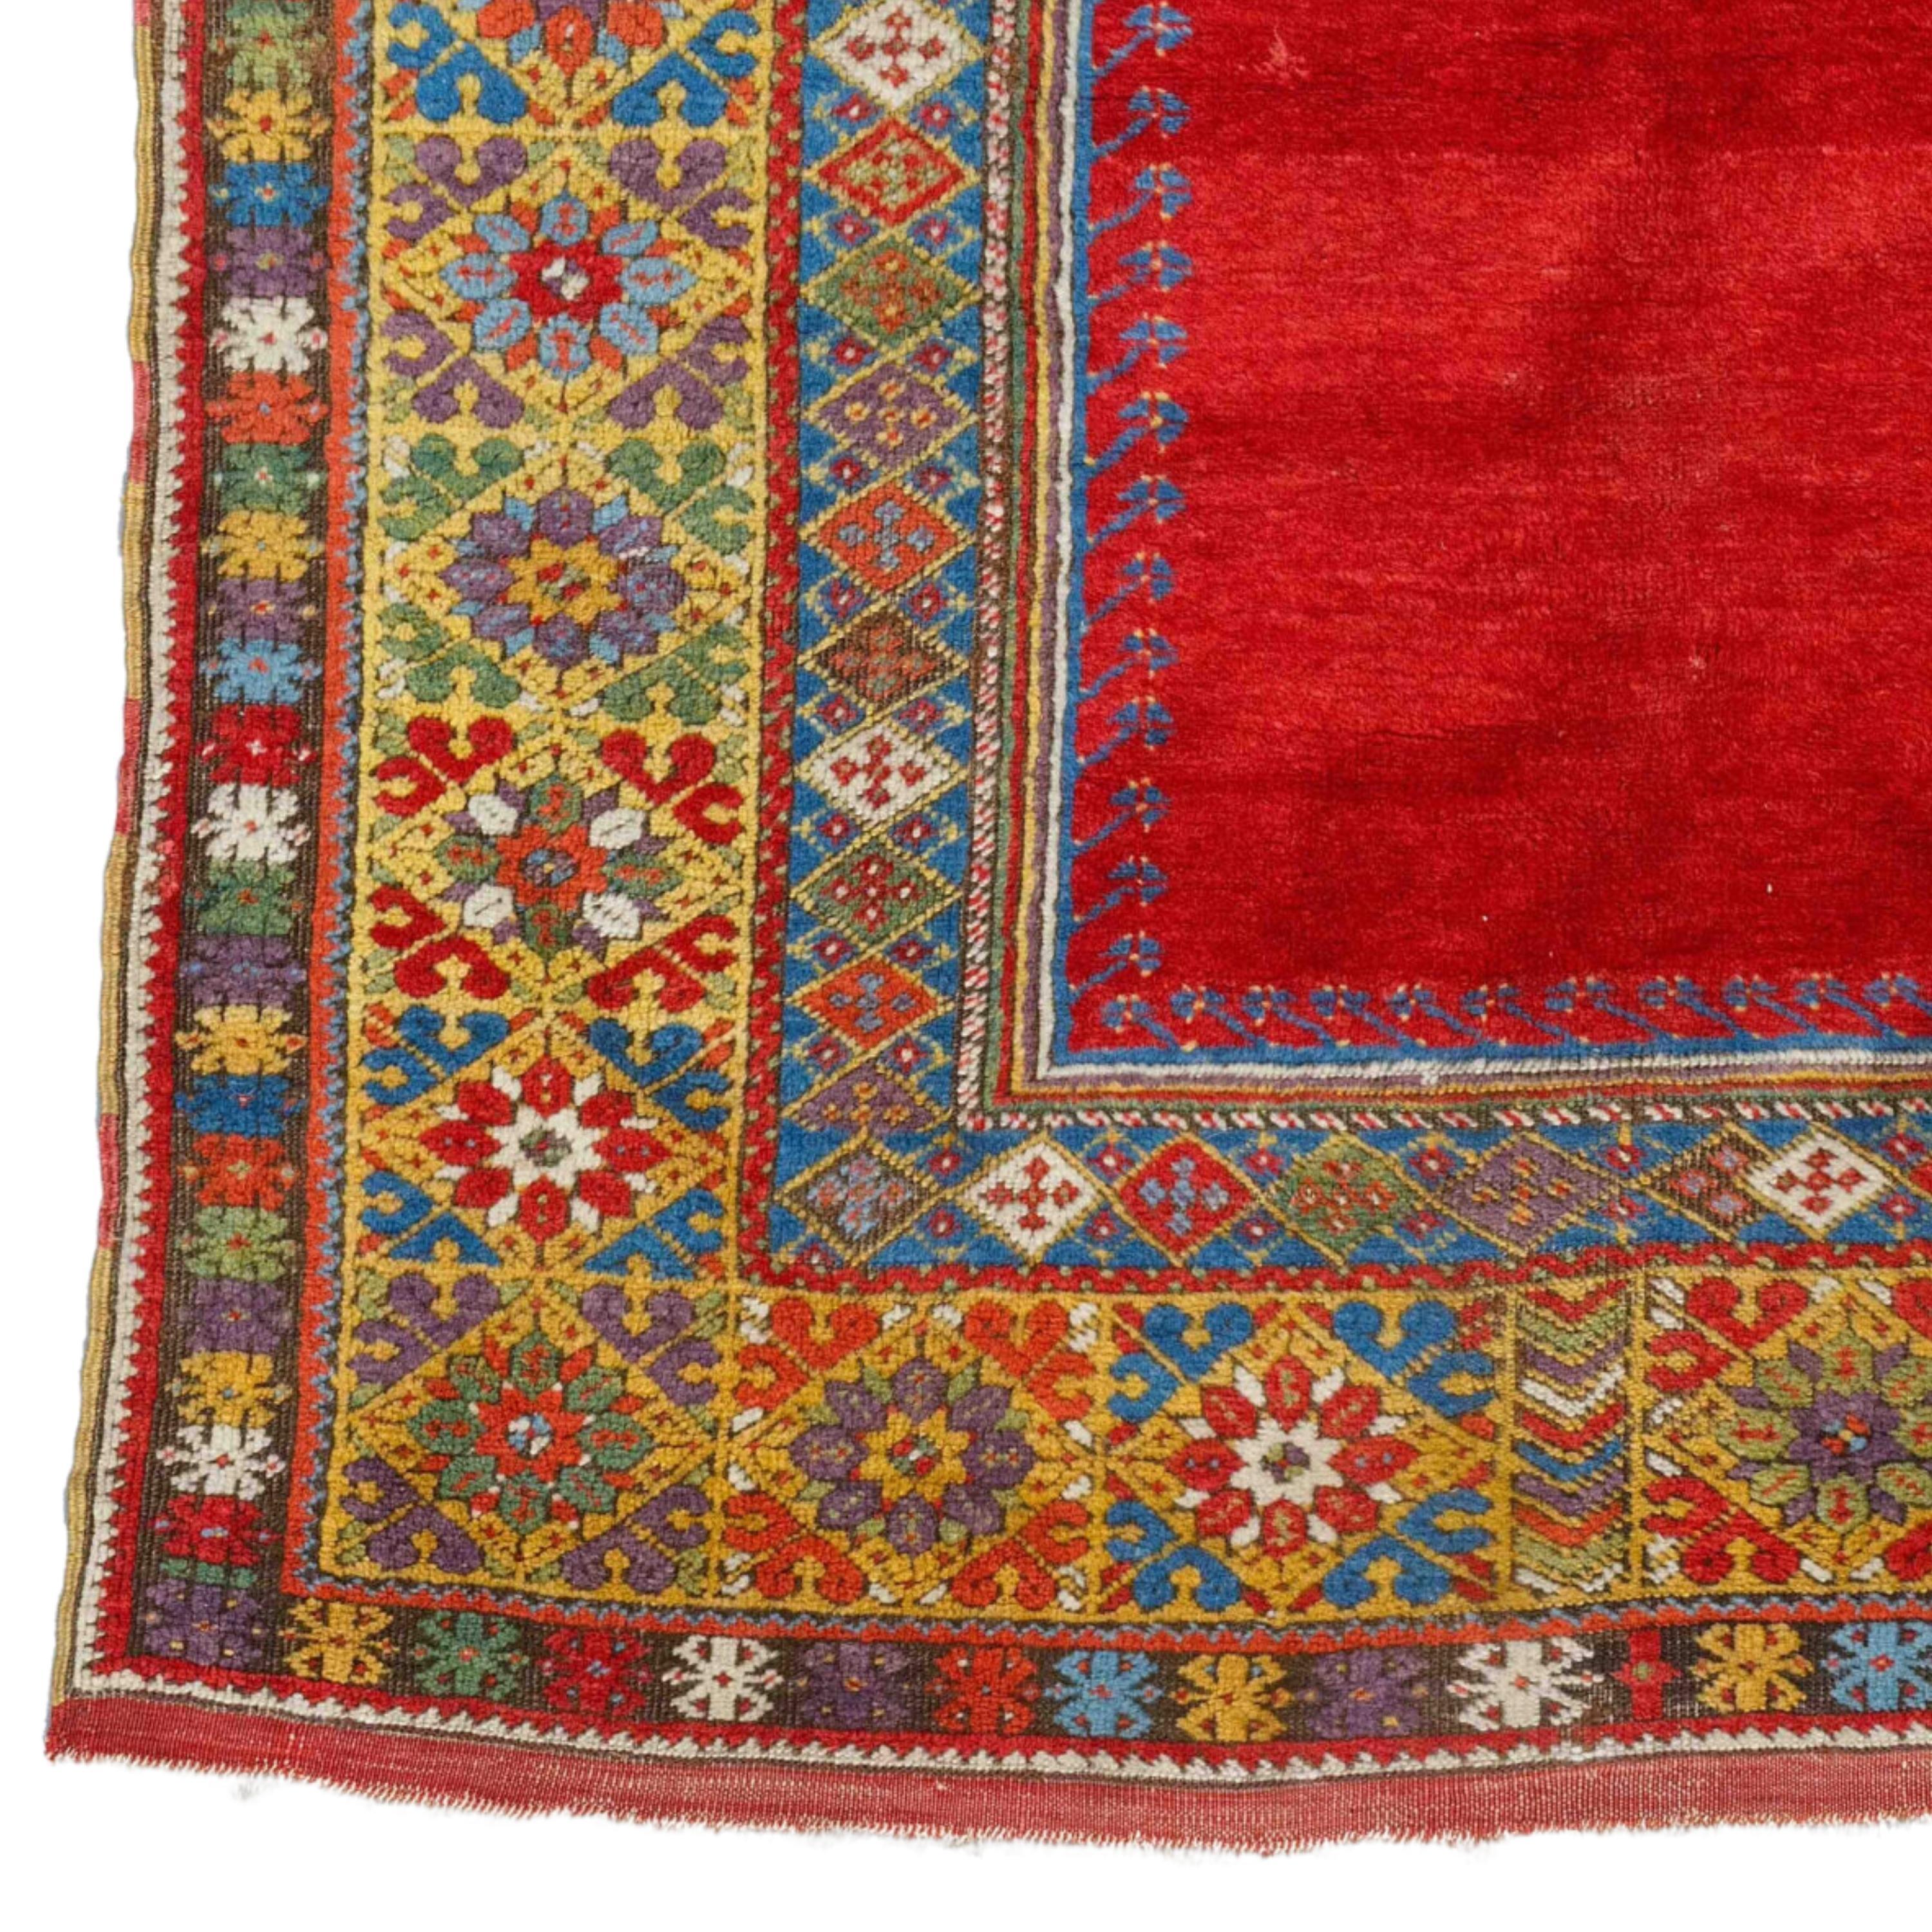 Antique Mudjur Rug - 19th Century Central Anatolia Mudjur Prayer Rug Size 128 x 157 cm

Niche design Mujur carpets were highly popular during the 19th century, selling to all the regions of the Islamic world. They are often very realistically